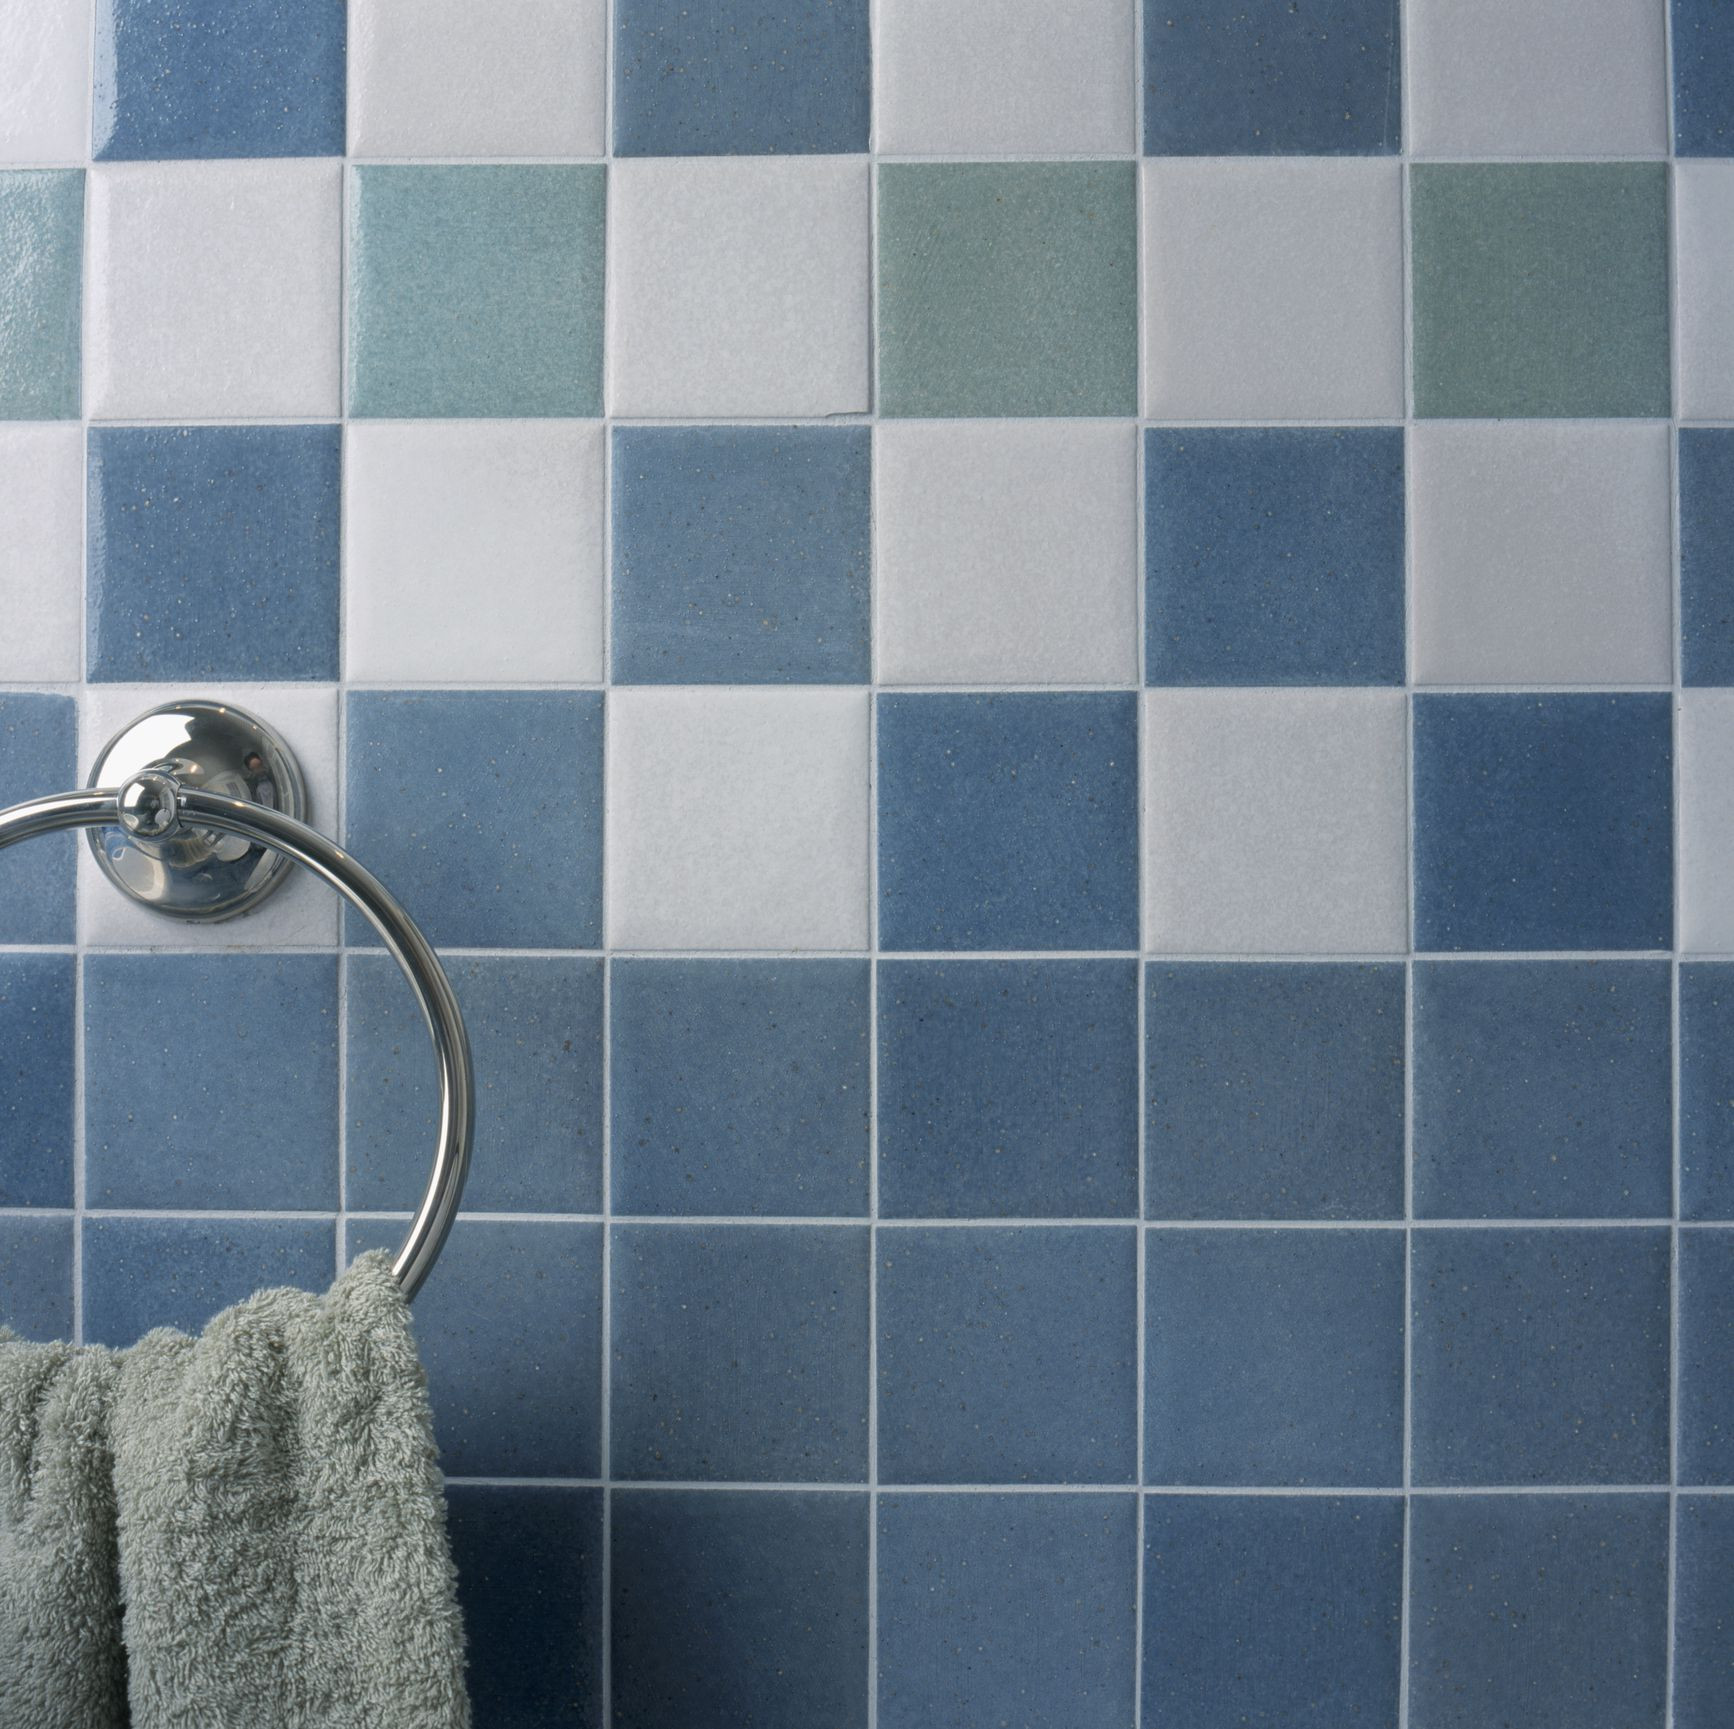 Bathroom Floor Tile Grout
 Removing Tile Grout in a Few Simple Steps